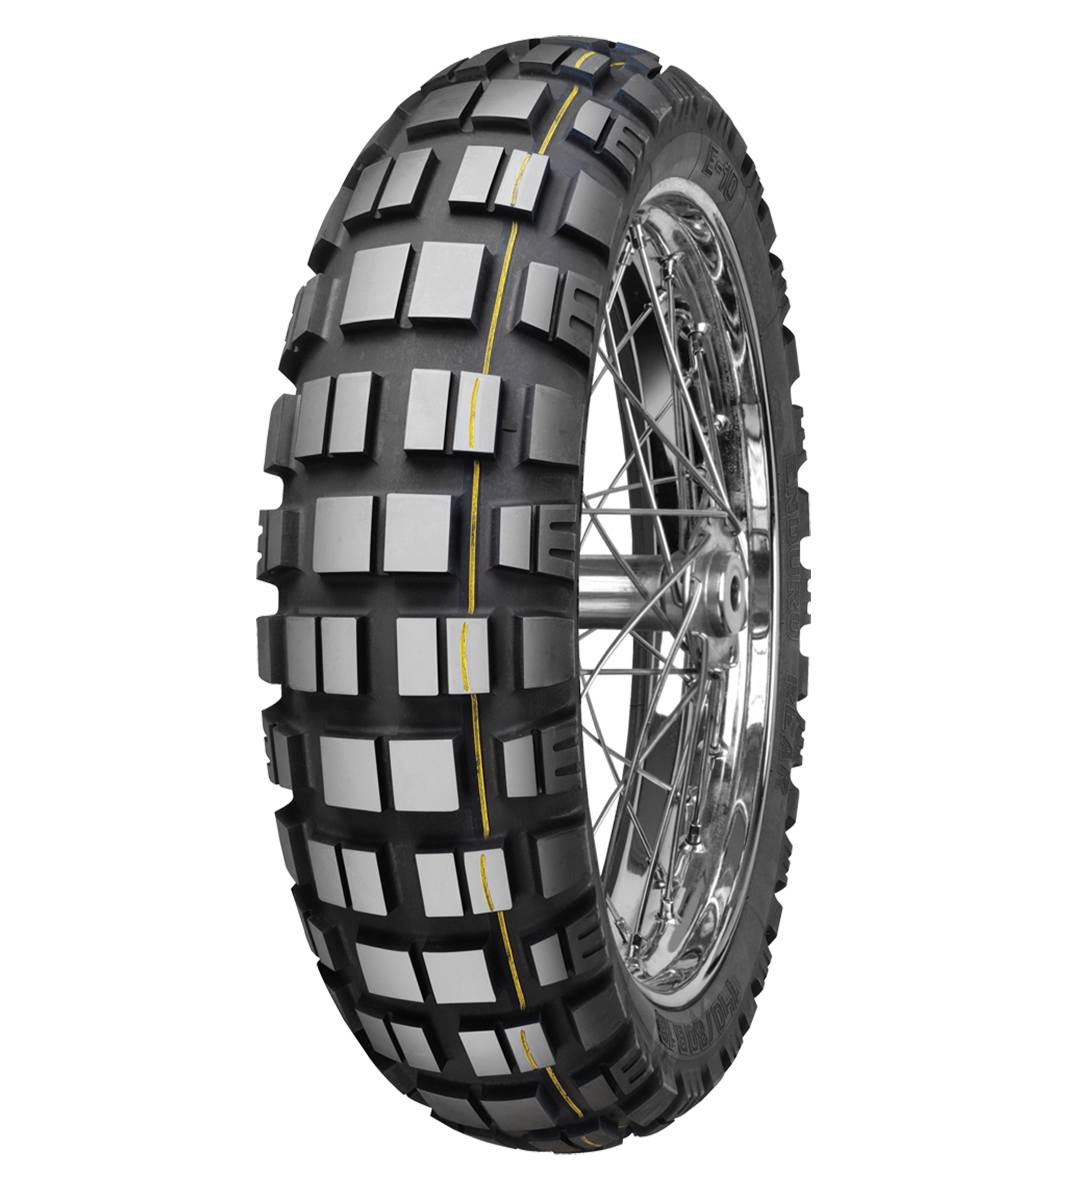 Mitas E-10 ENDURO 150/70B18 Trail OFF Trail DAKAR 70T Yellow Tubeless Rear Tire, 224163, 150/70B18, Adventure Touring, E Series, E-10 Enduro, Rear, Trail, Trail OFF, Tires - Imported and distributed in North &amp; South America by Lindeco Genuine Powersports - Premier Powersports Equipment and Accessories for Motorcycle Enthusiasts, Professional Riders and Dealers.